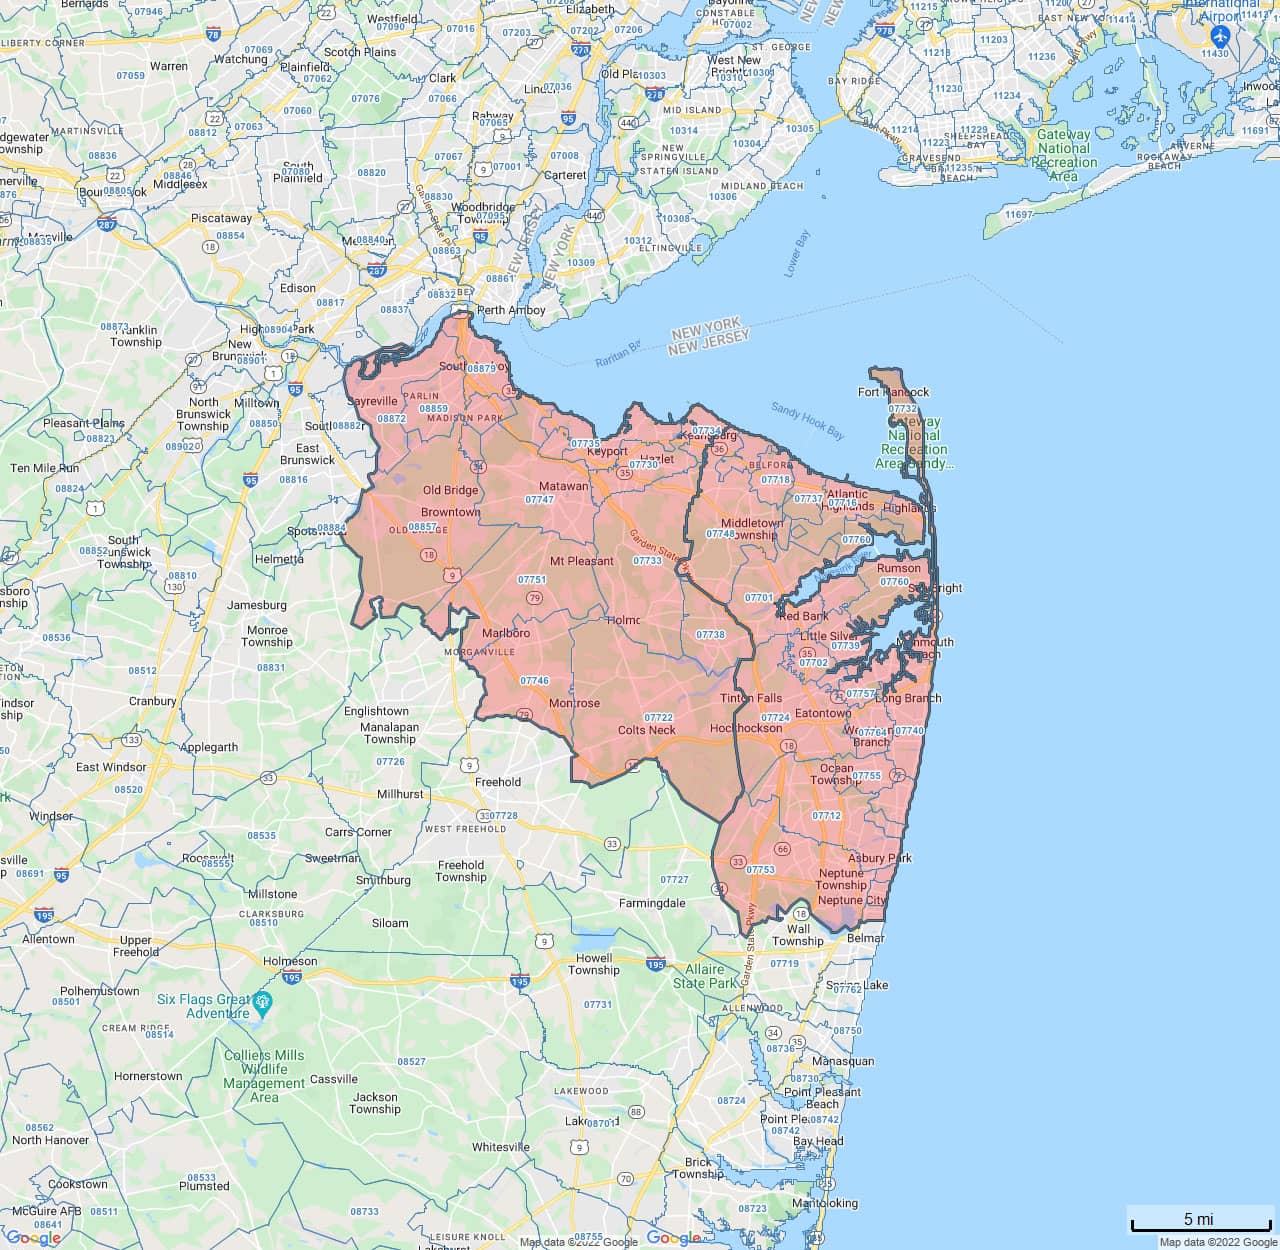 All Dry Services Area Coverage Map for Marlboro / Red Bank, NJ